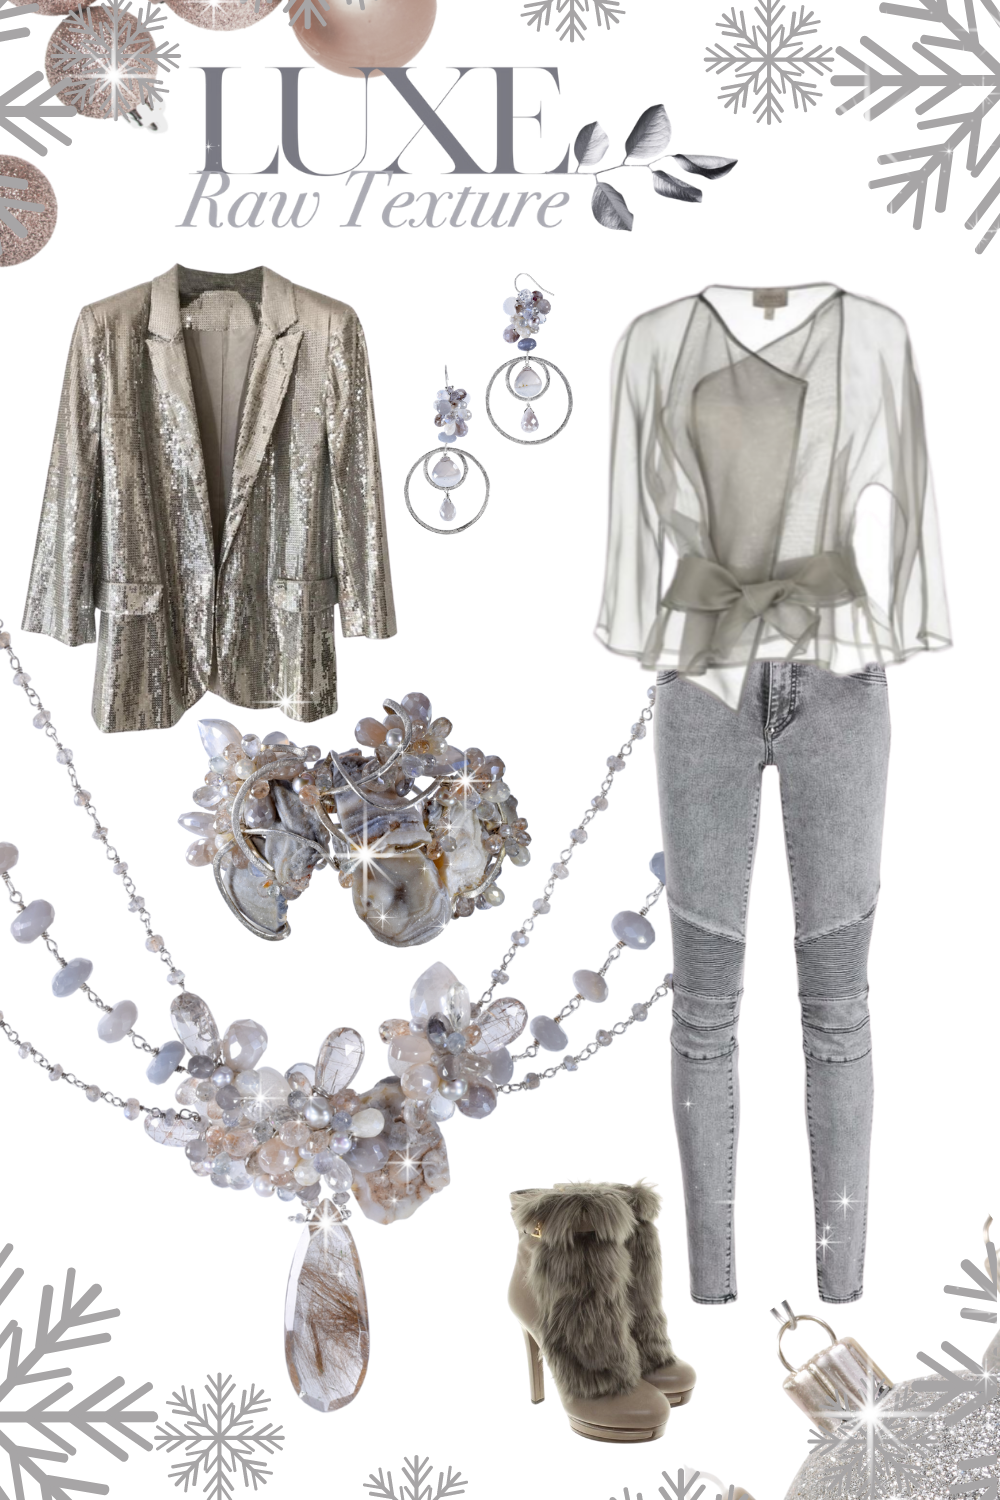 outfit with druzy and gemstone necklace, bracelet, and earrings